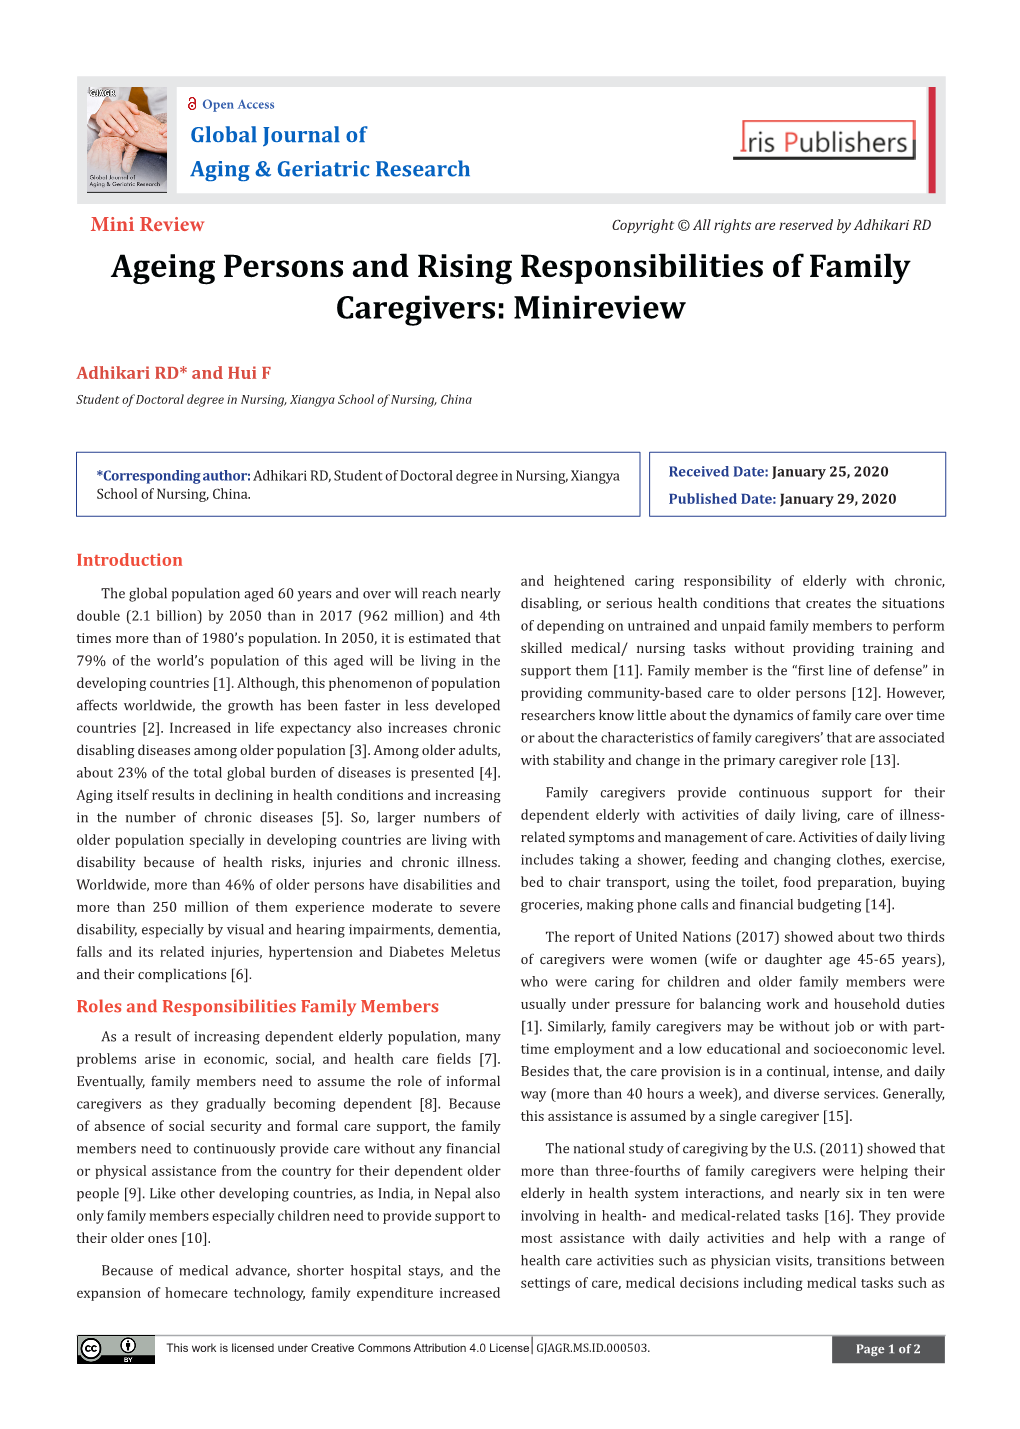 Ageing Persons and Rising Responsibilities of Family Caregivers: Minireview